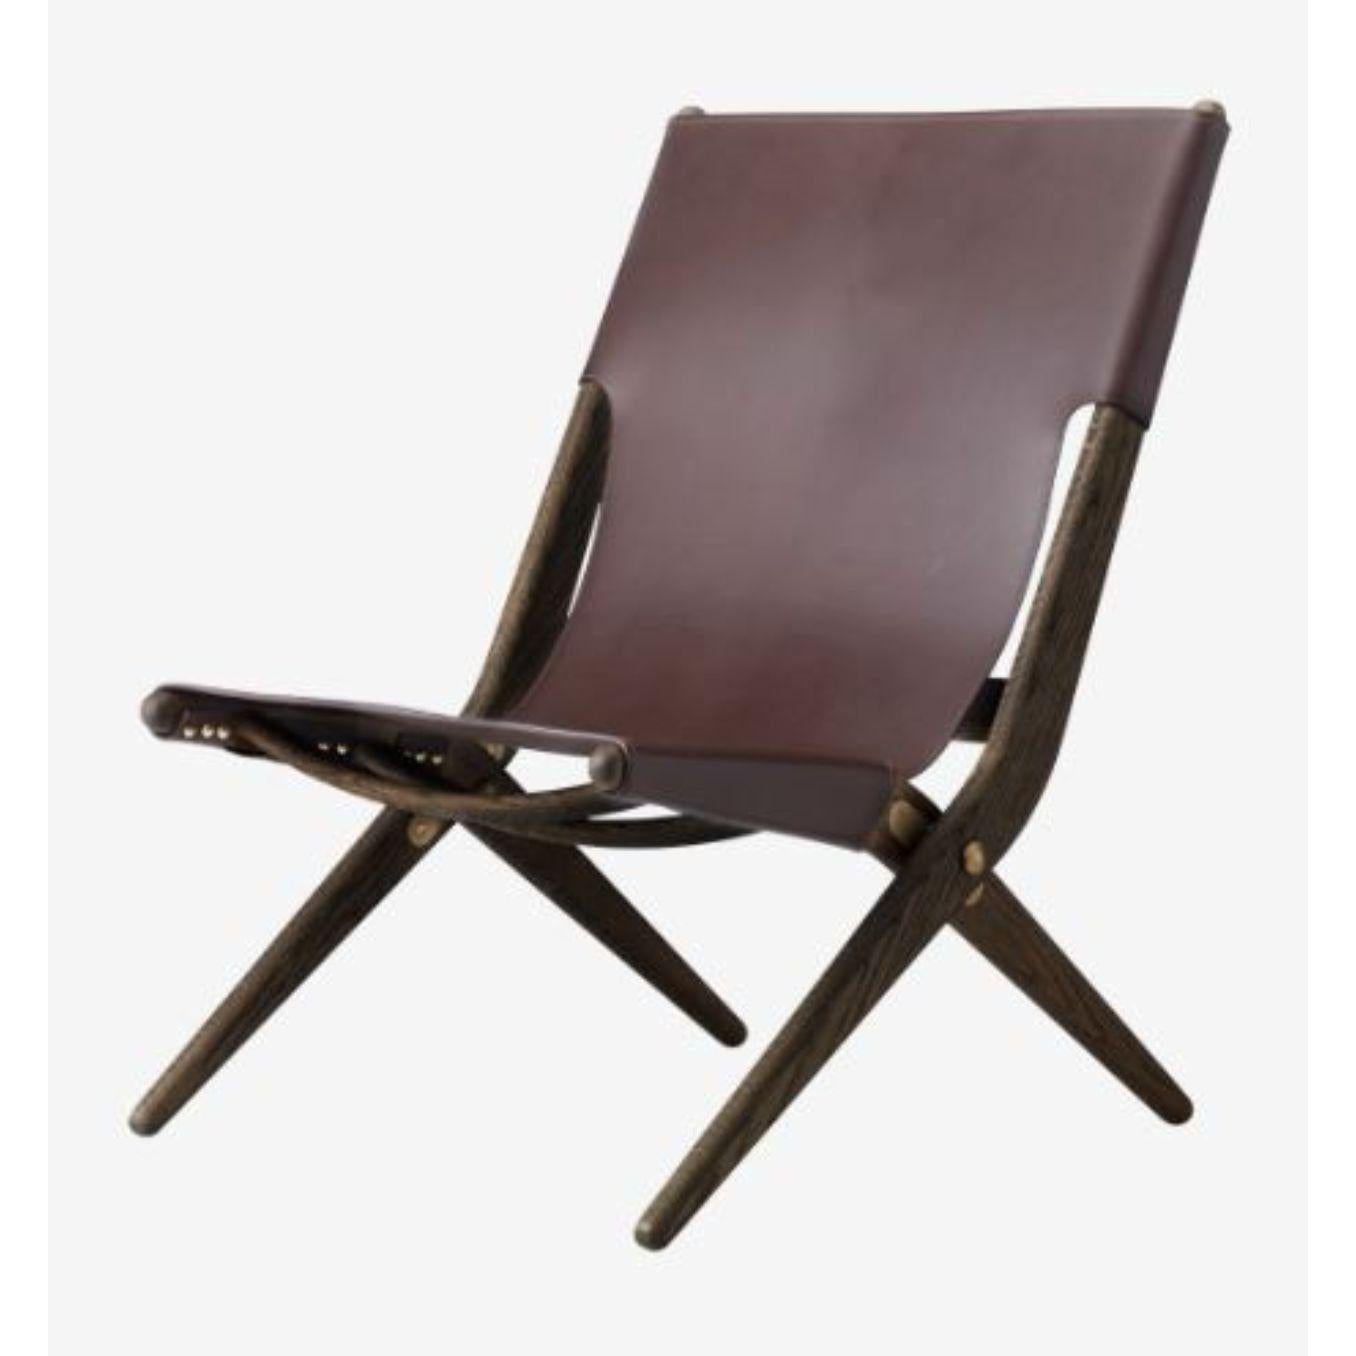 Brown leather saxe chair by Lassen
Dimensions: D 67 x W 60 x H 84 cm 
Materials: leather, wood, brown oiled oak
Also available in different colors and materials. 
Weight: 13 Kg

Mogens Lassen was perceived as ‘the naughty boy in class’, but he